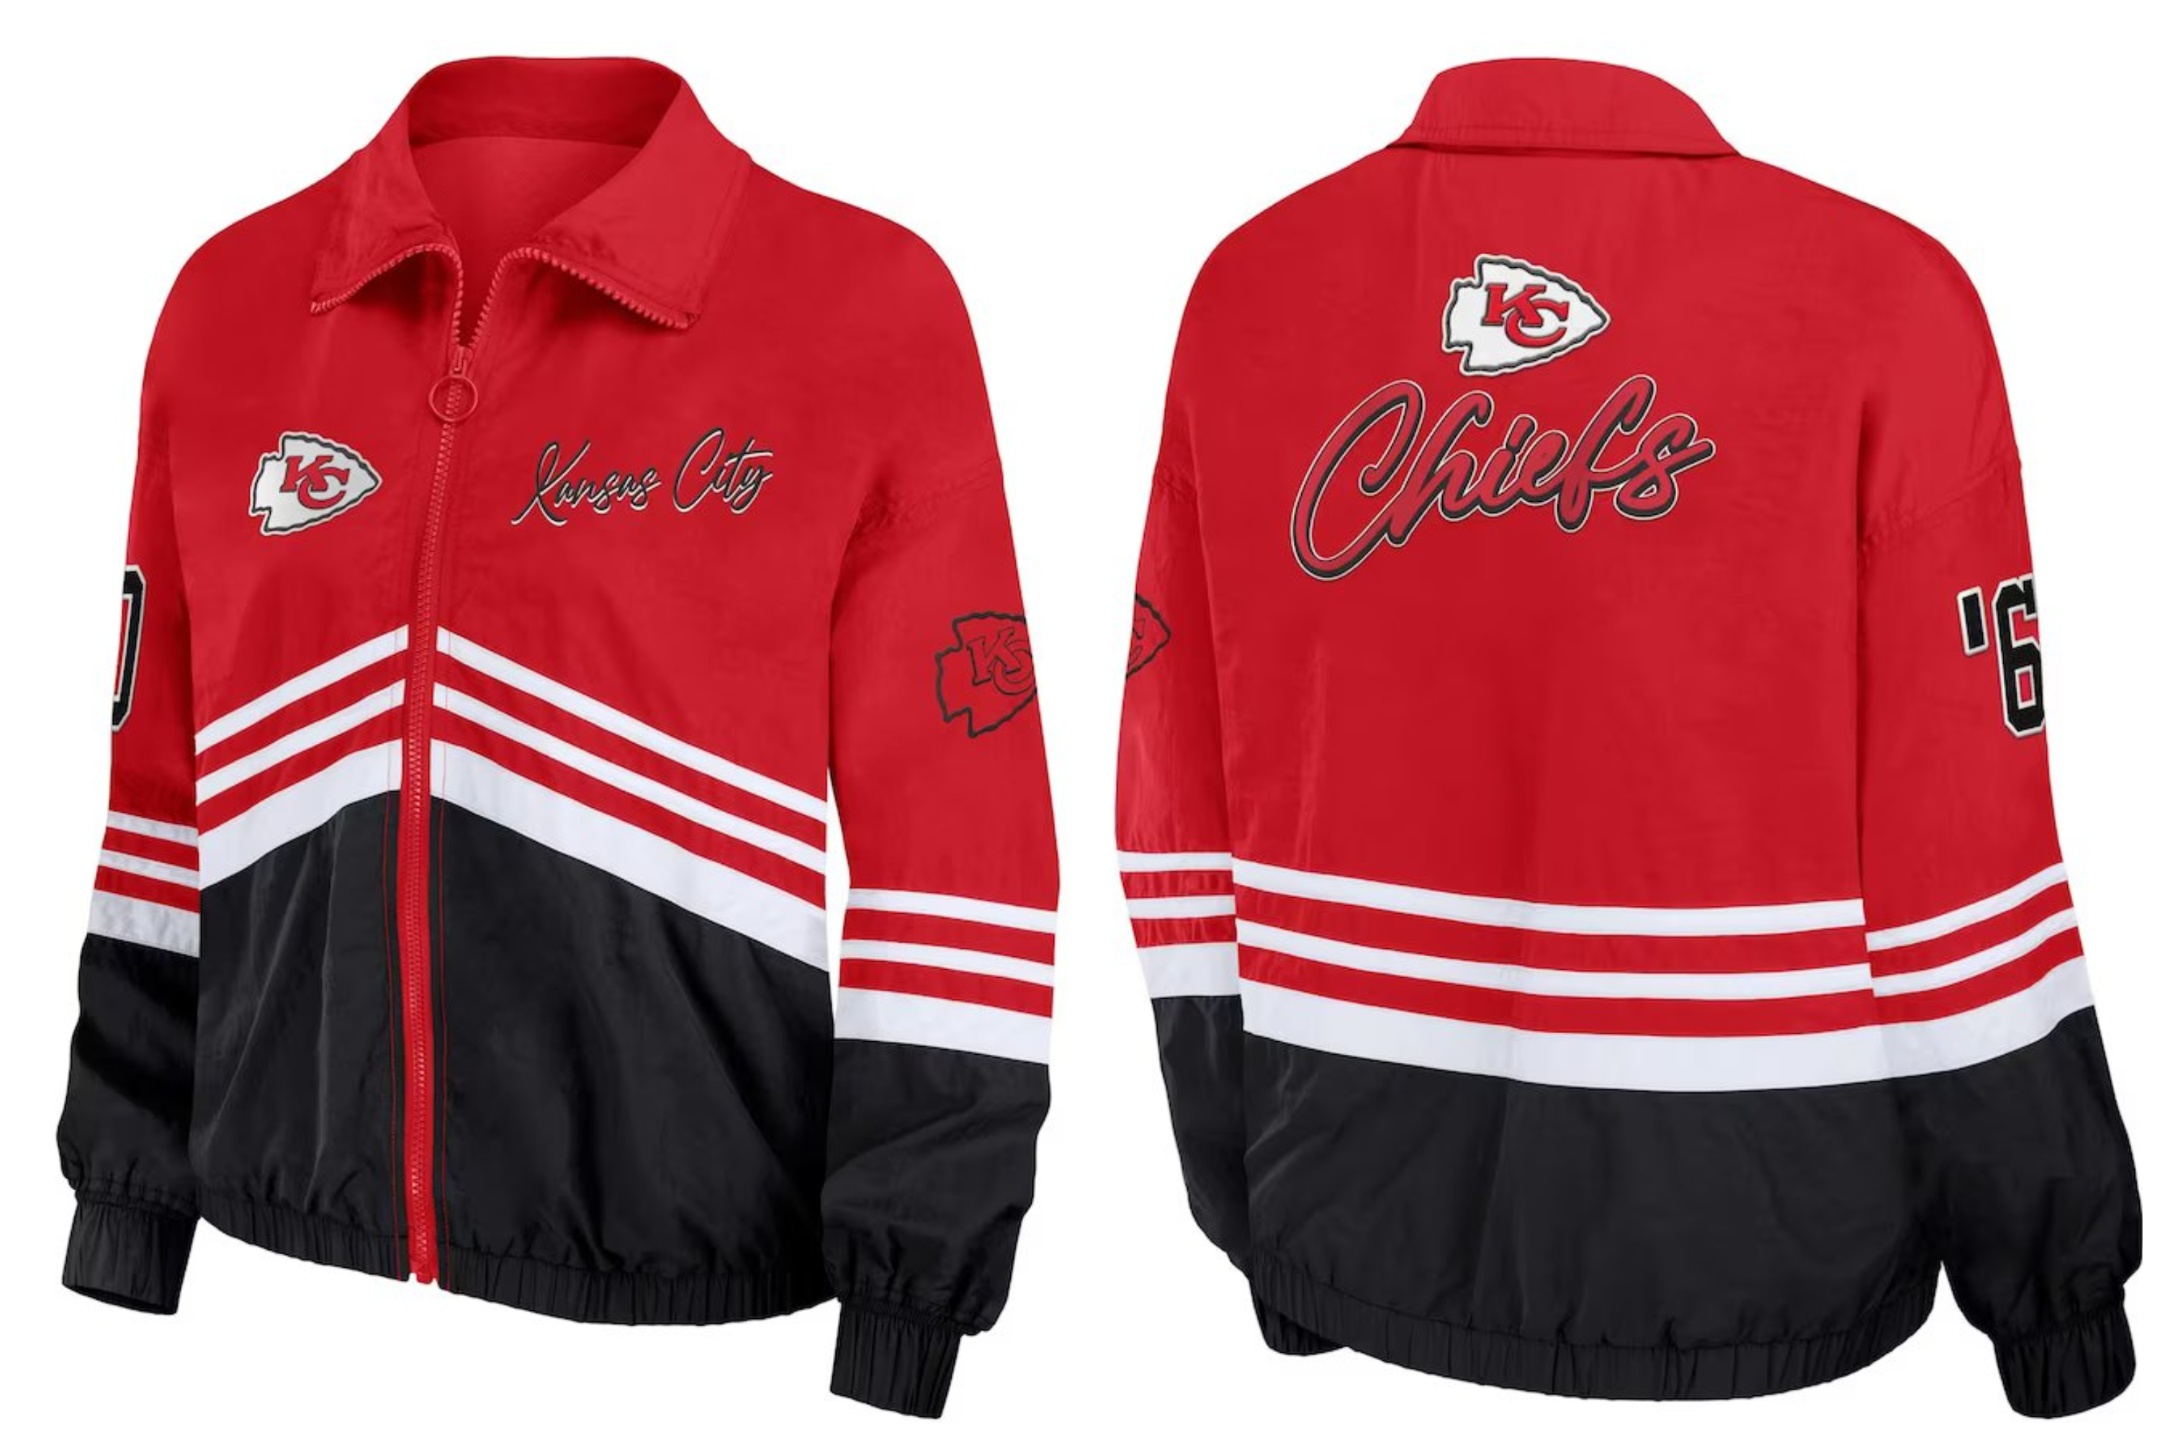 How To Buy The Taylor Swift Kansas City Chiefs Jacket That Keeps